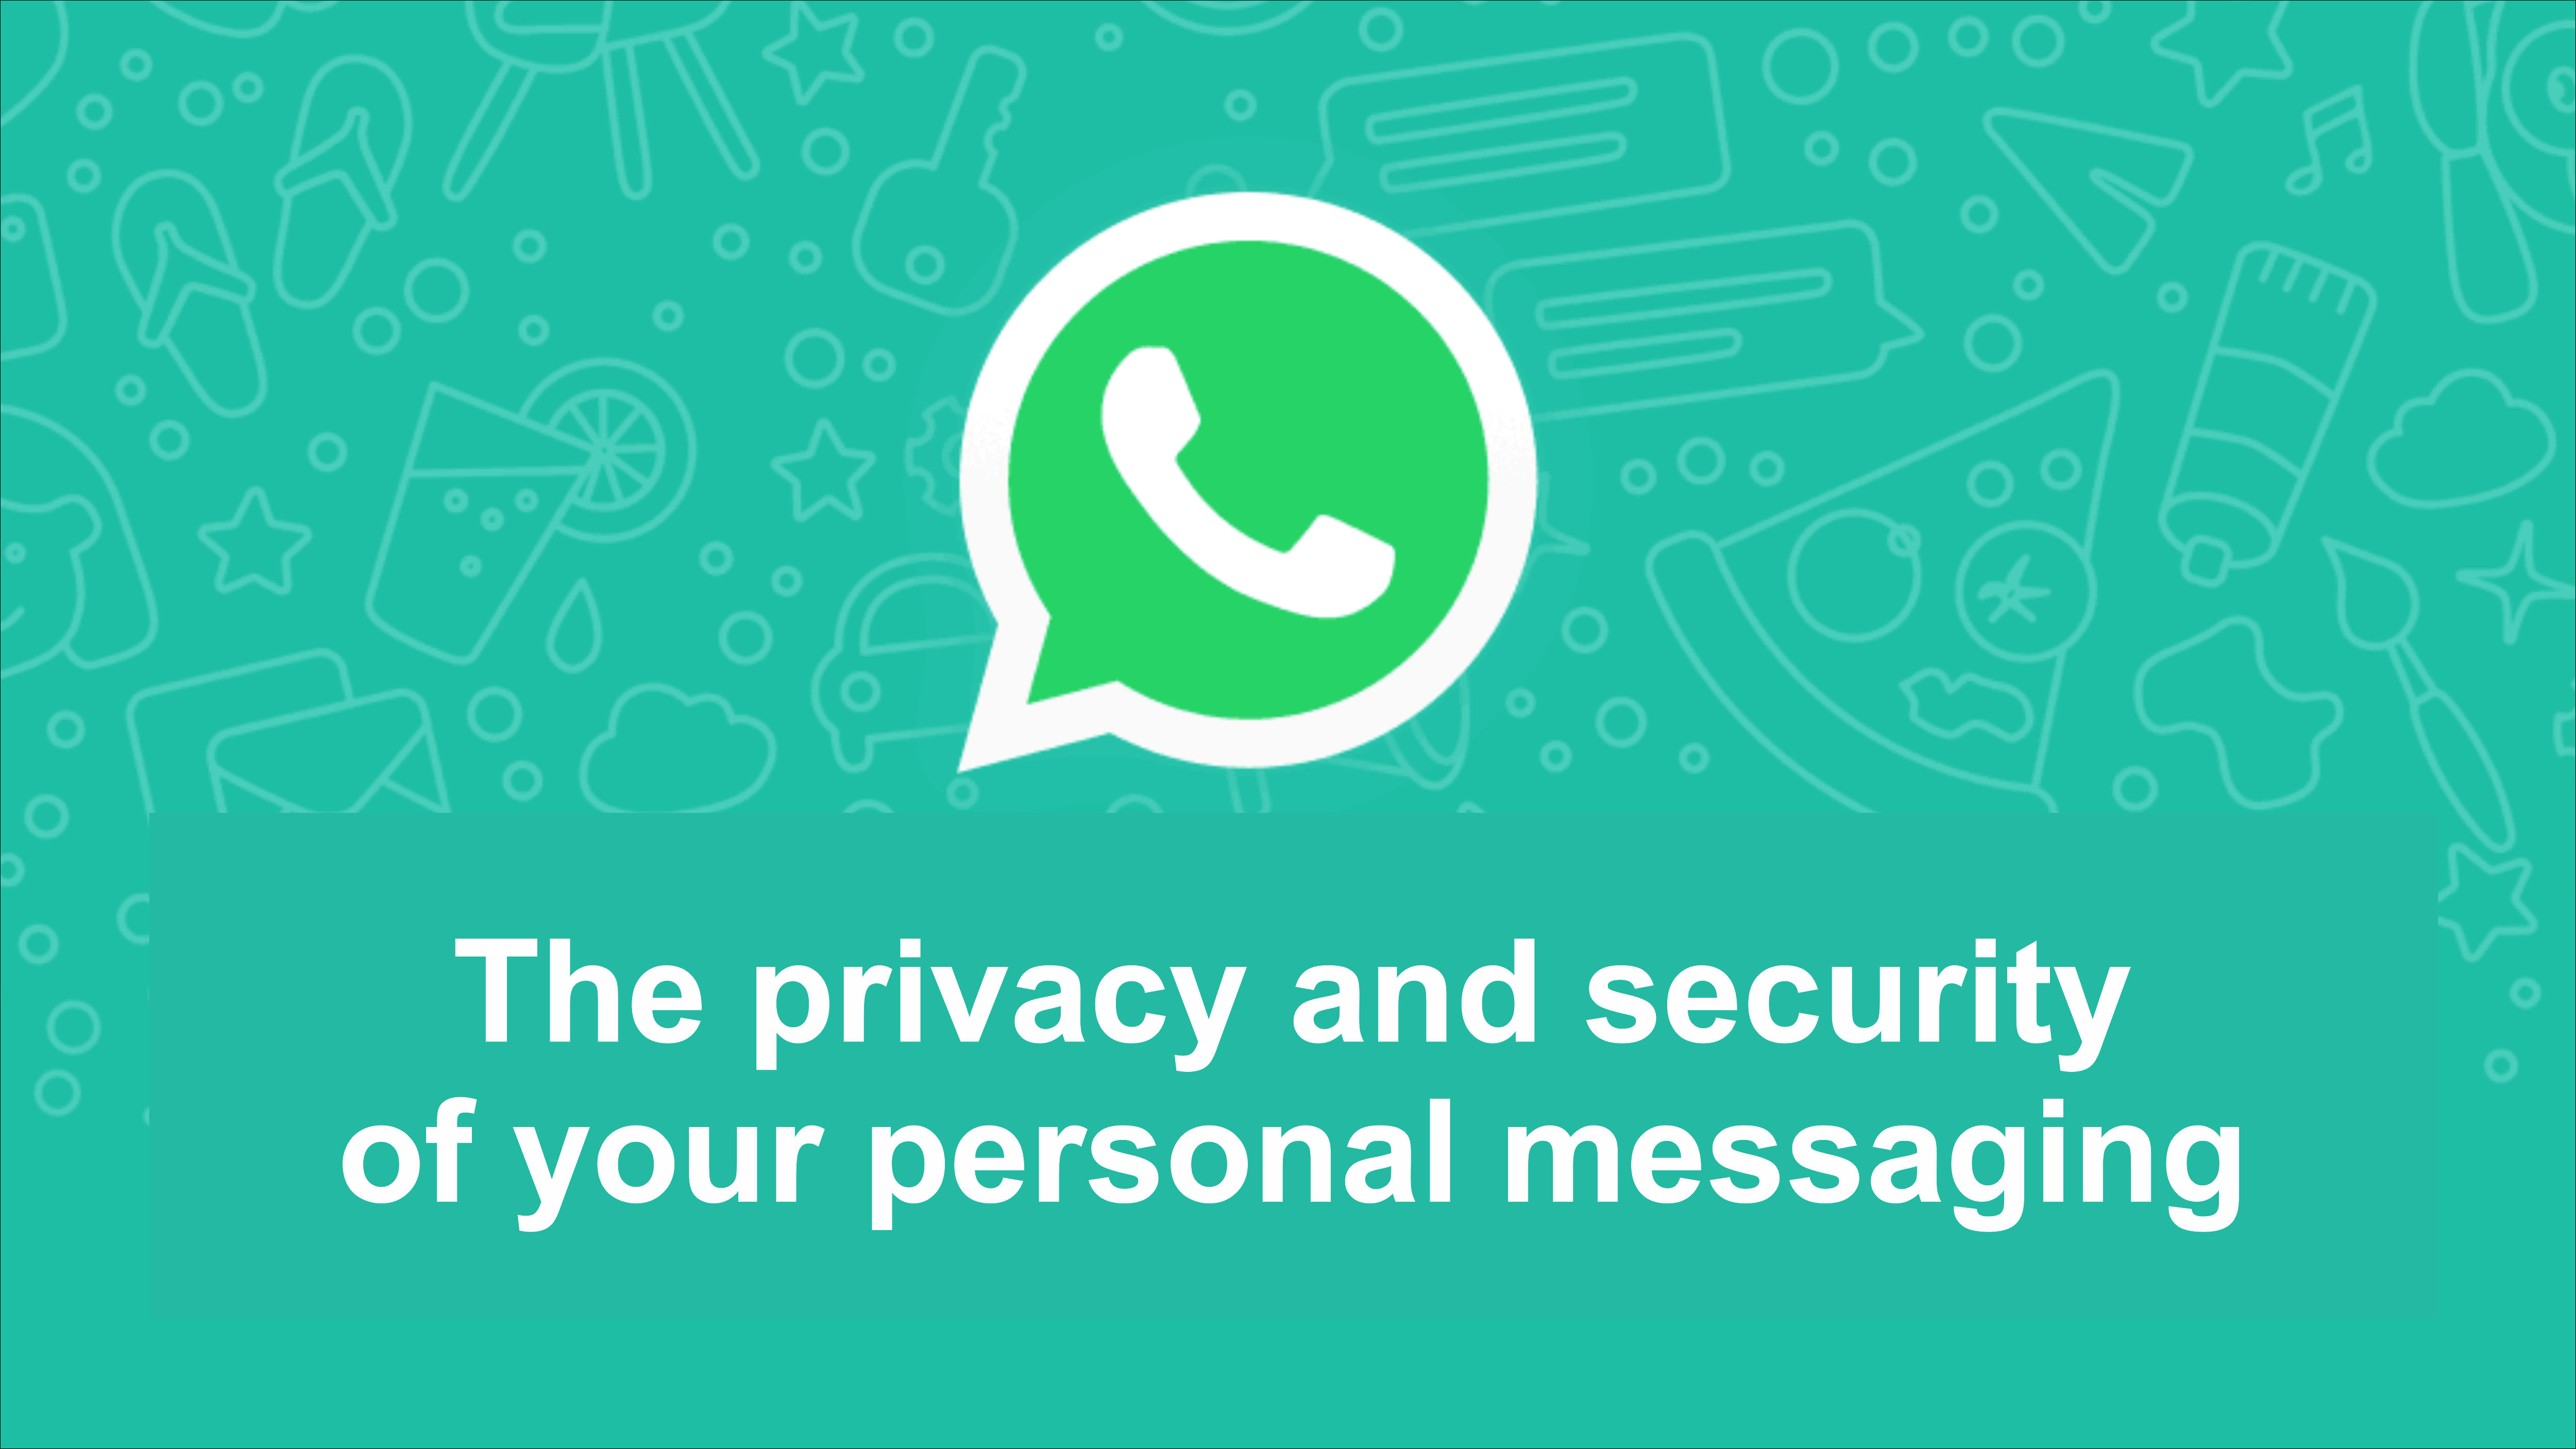 WhatsApp Privacy Policy 2021